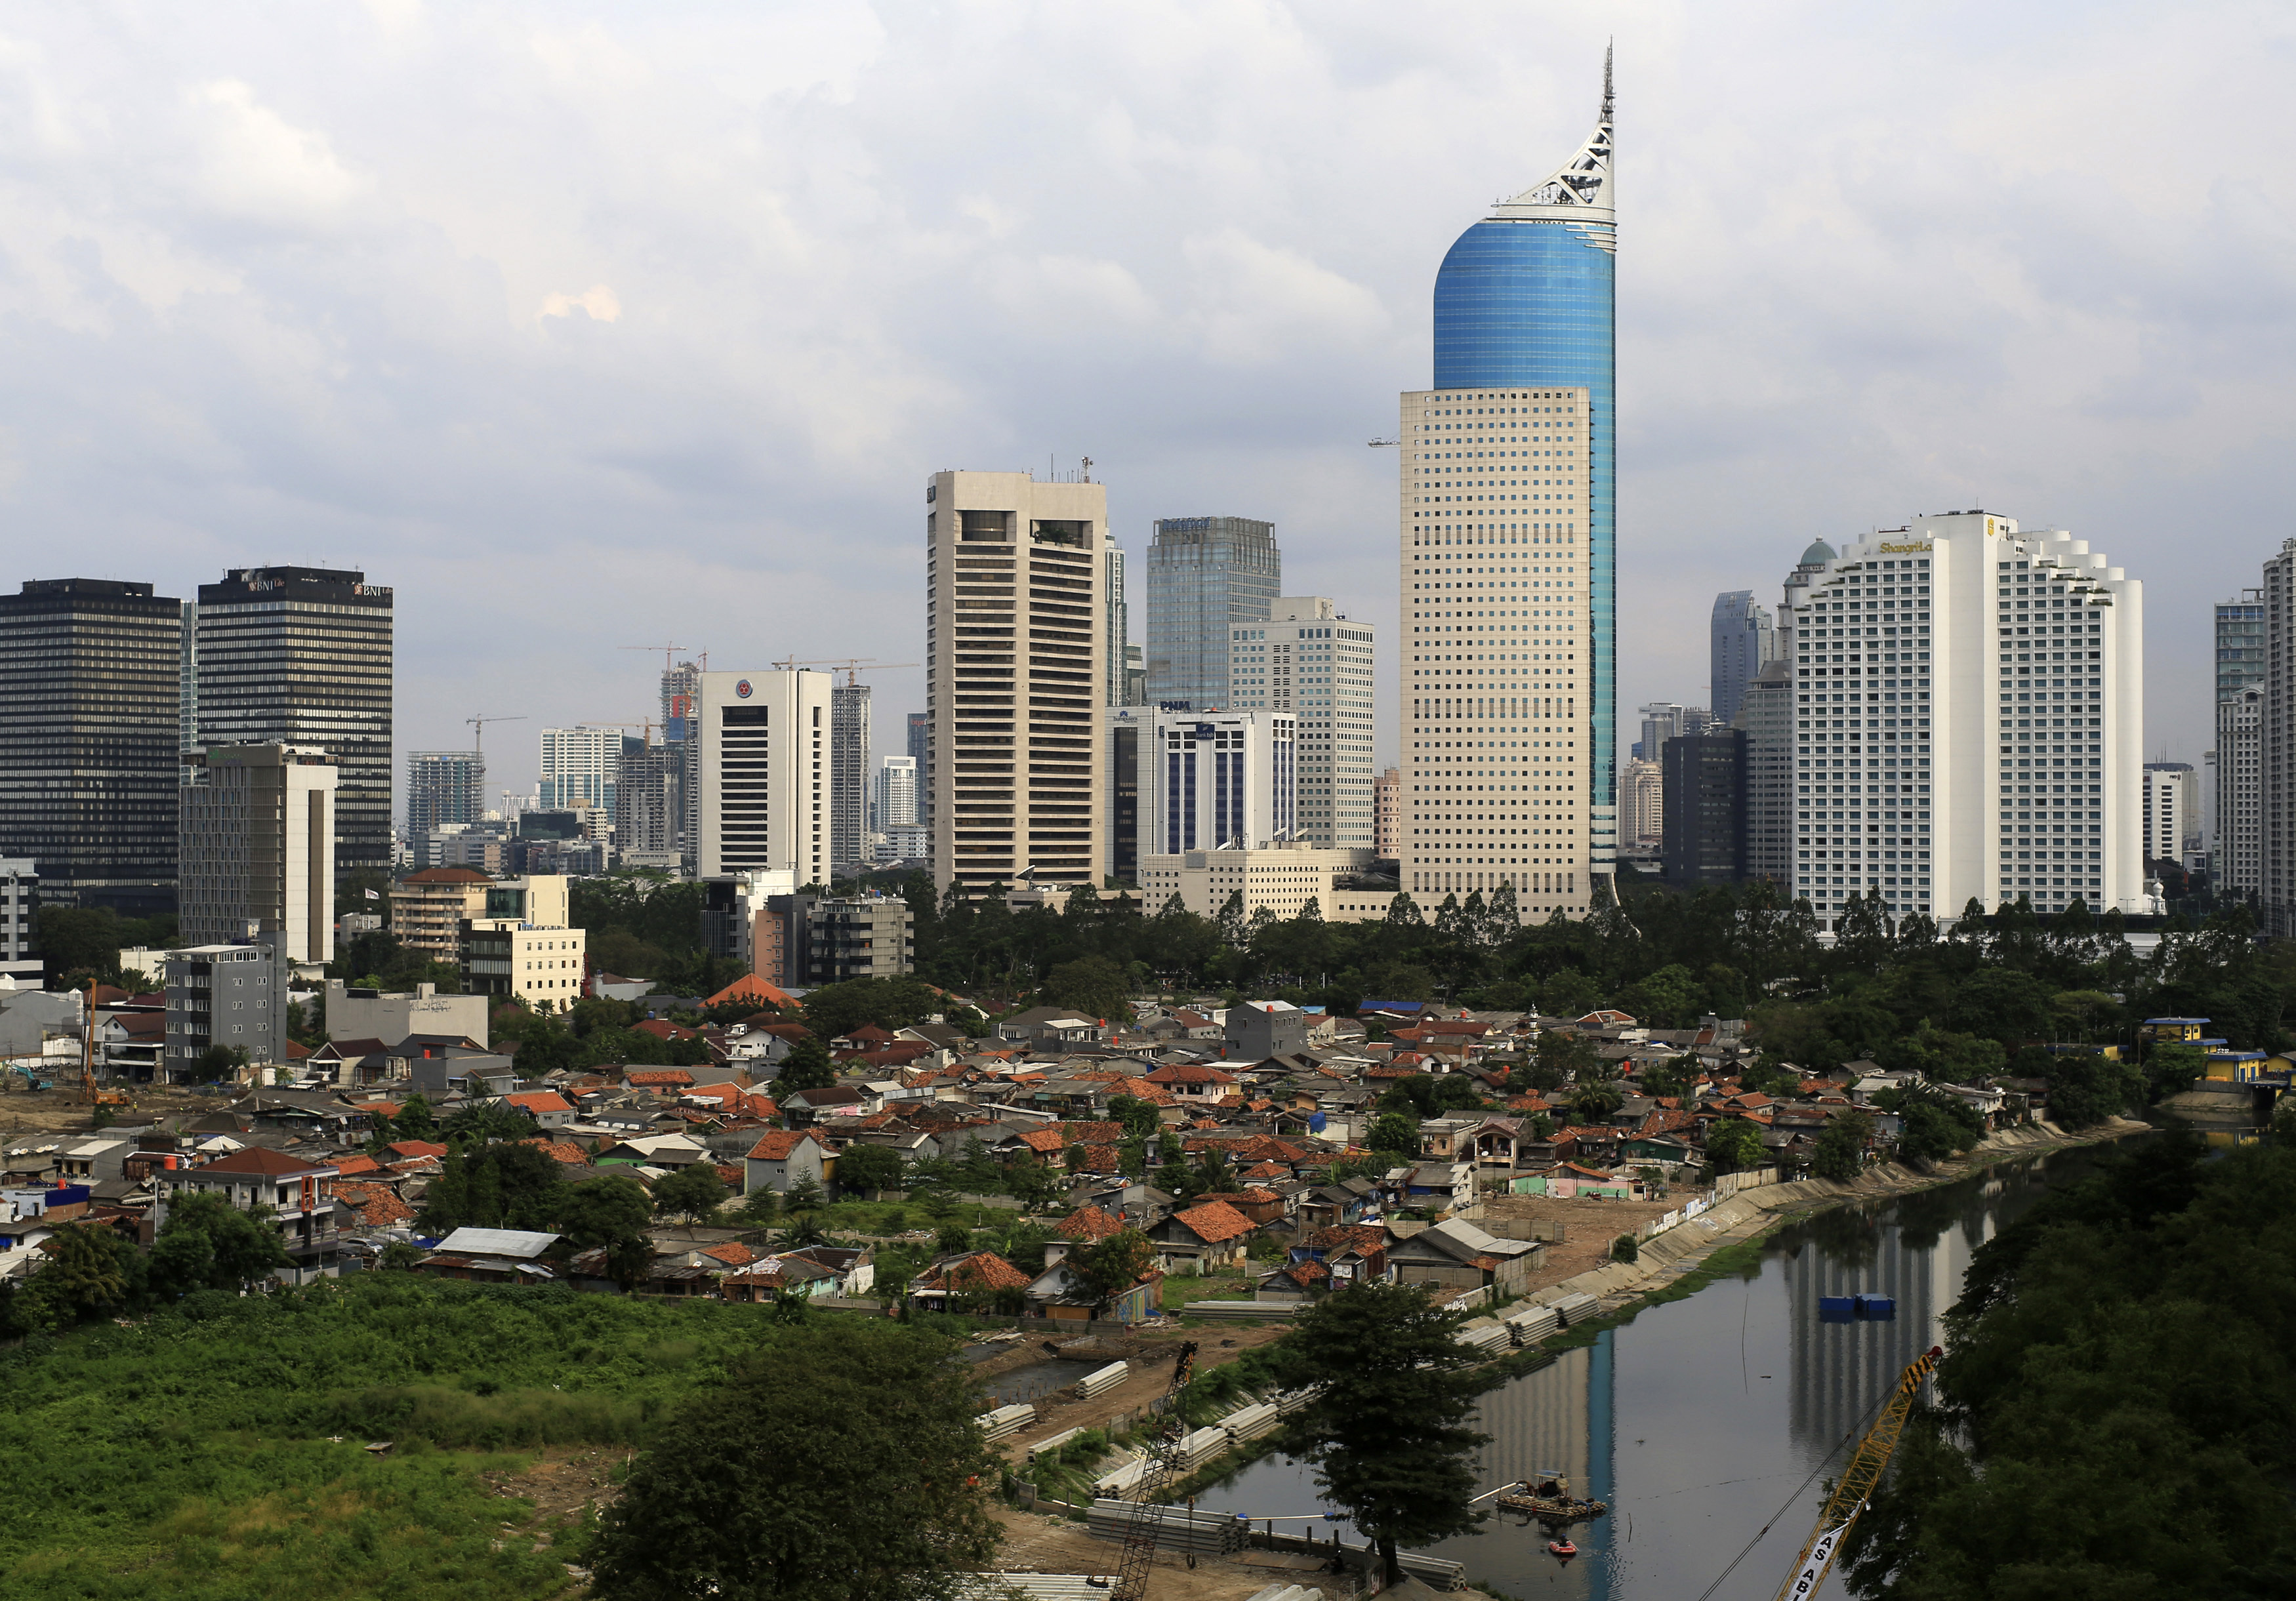 An aerial view of the business district in Jakarta